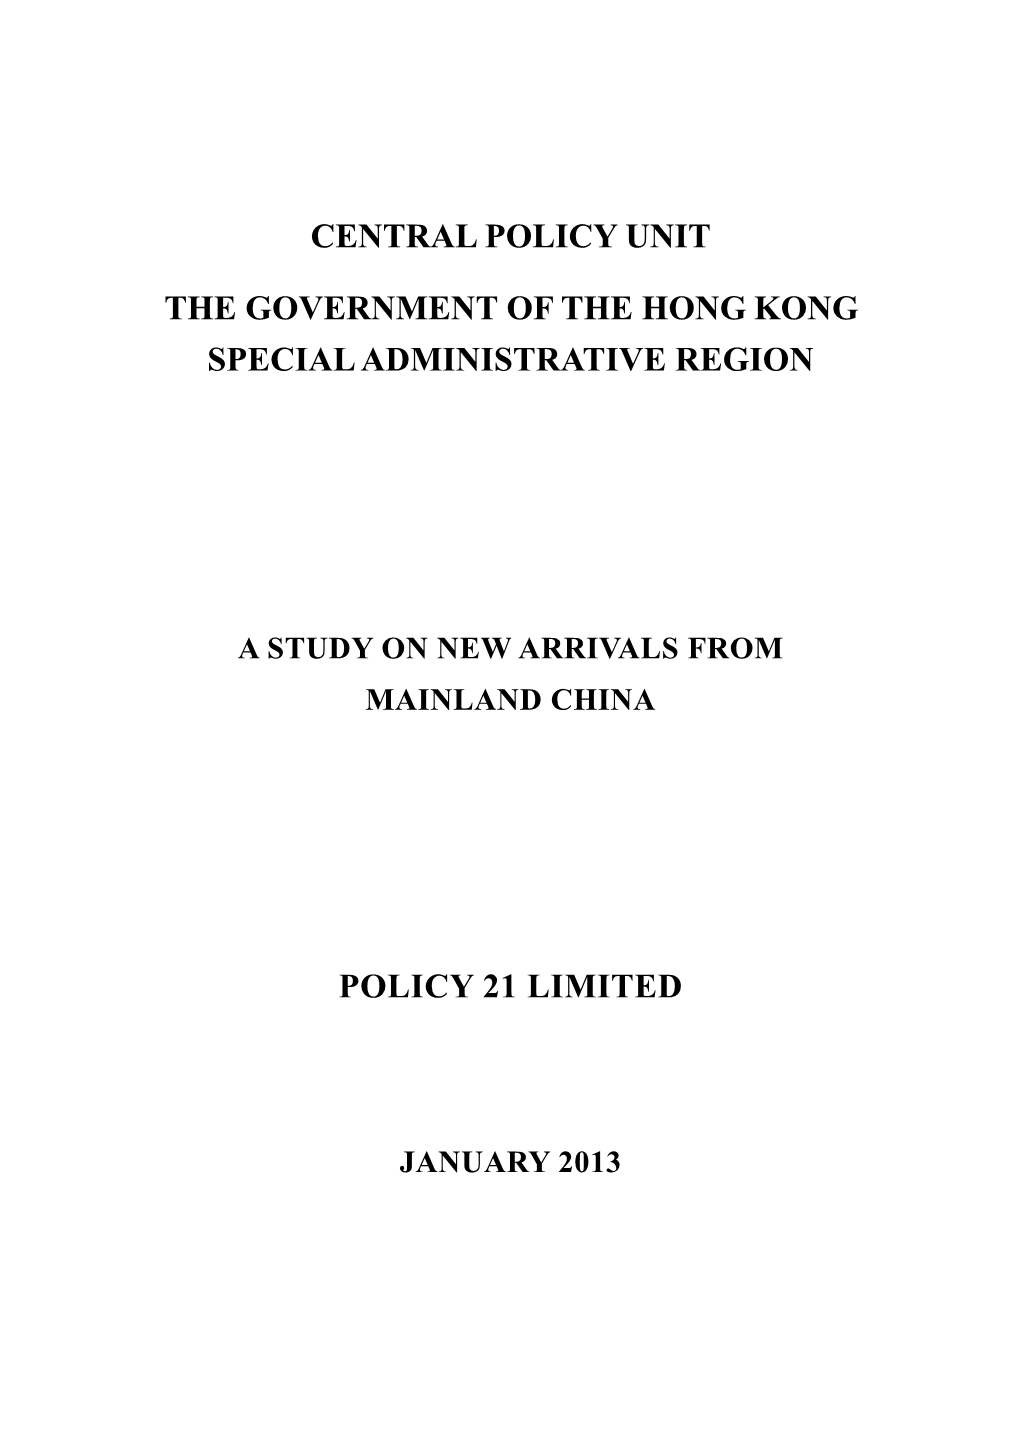 Central Policy Unit the Government of the Hong Kong Special Administrative Region Policy 21 Limited